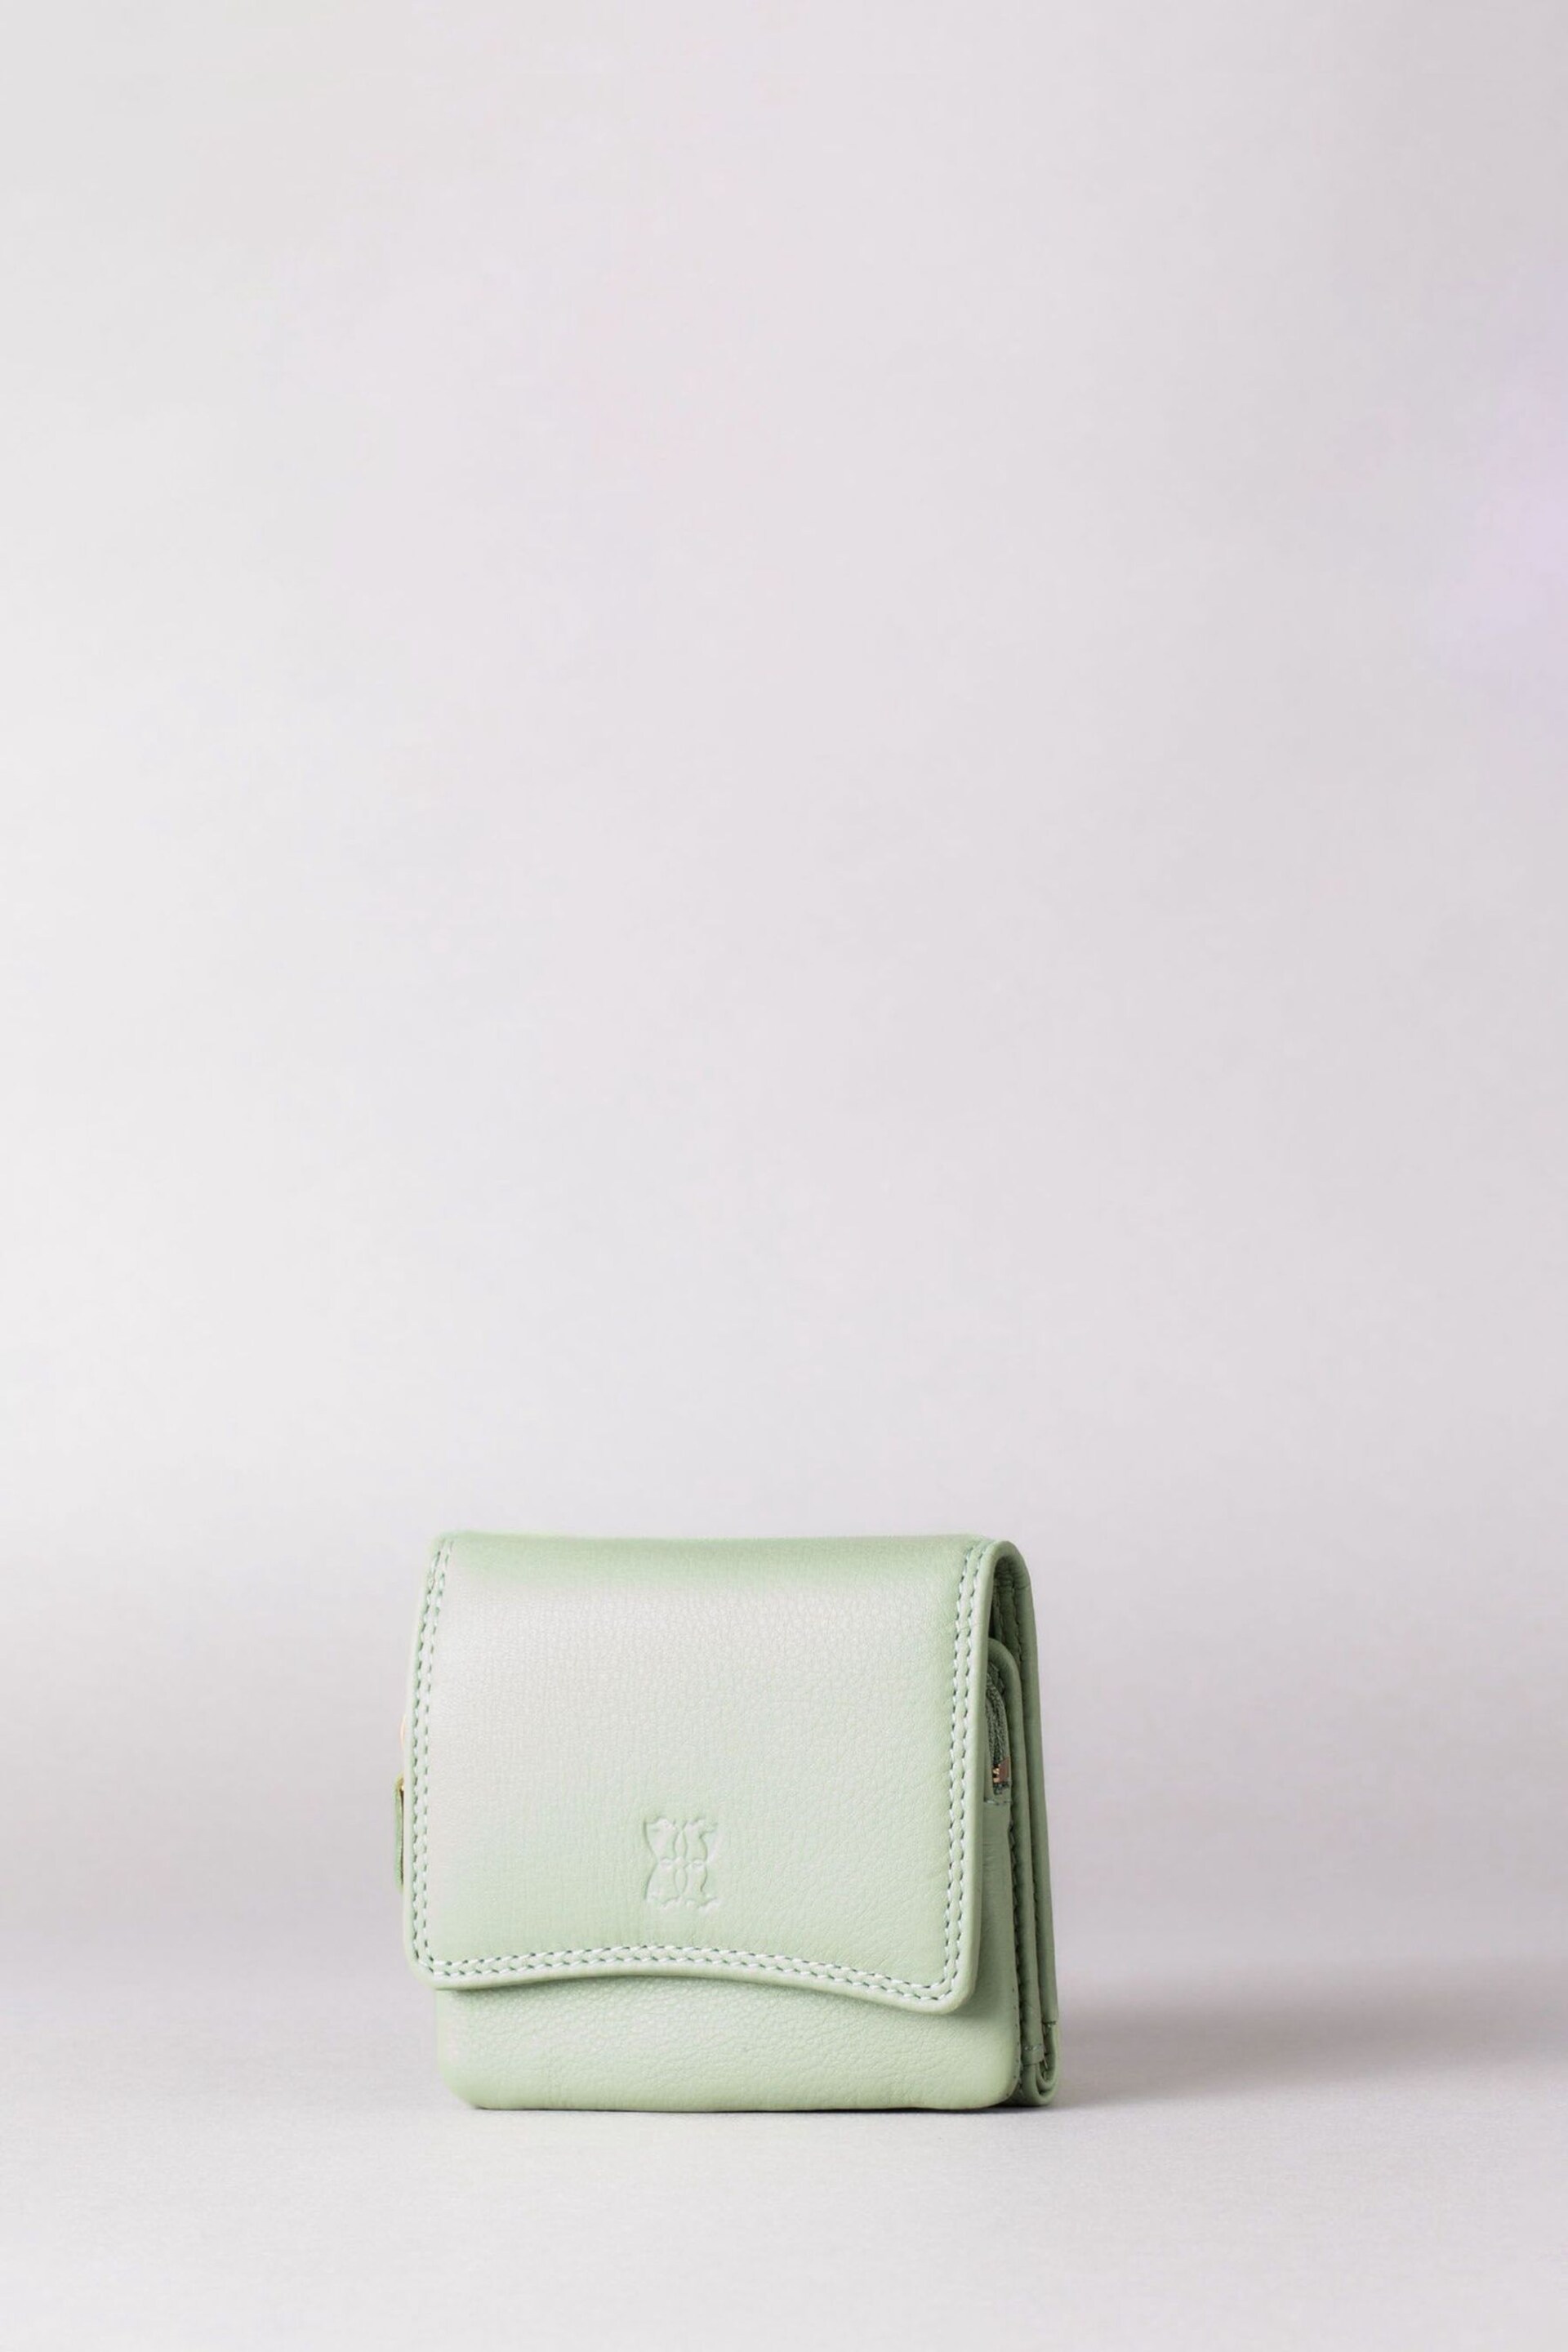 Lakeland Leather Green Small Leather Flapover Purse - Image 1 of 4